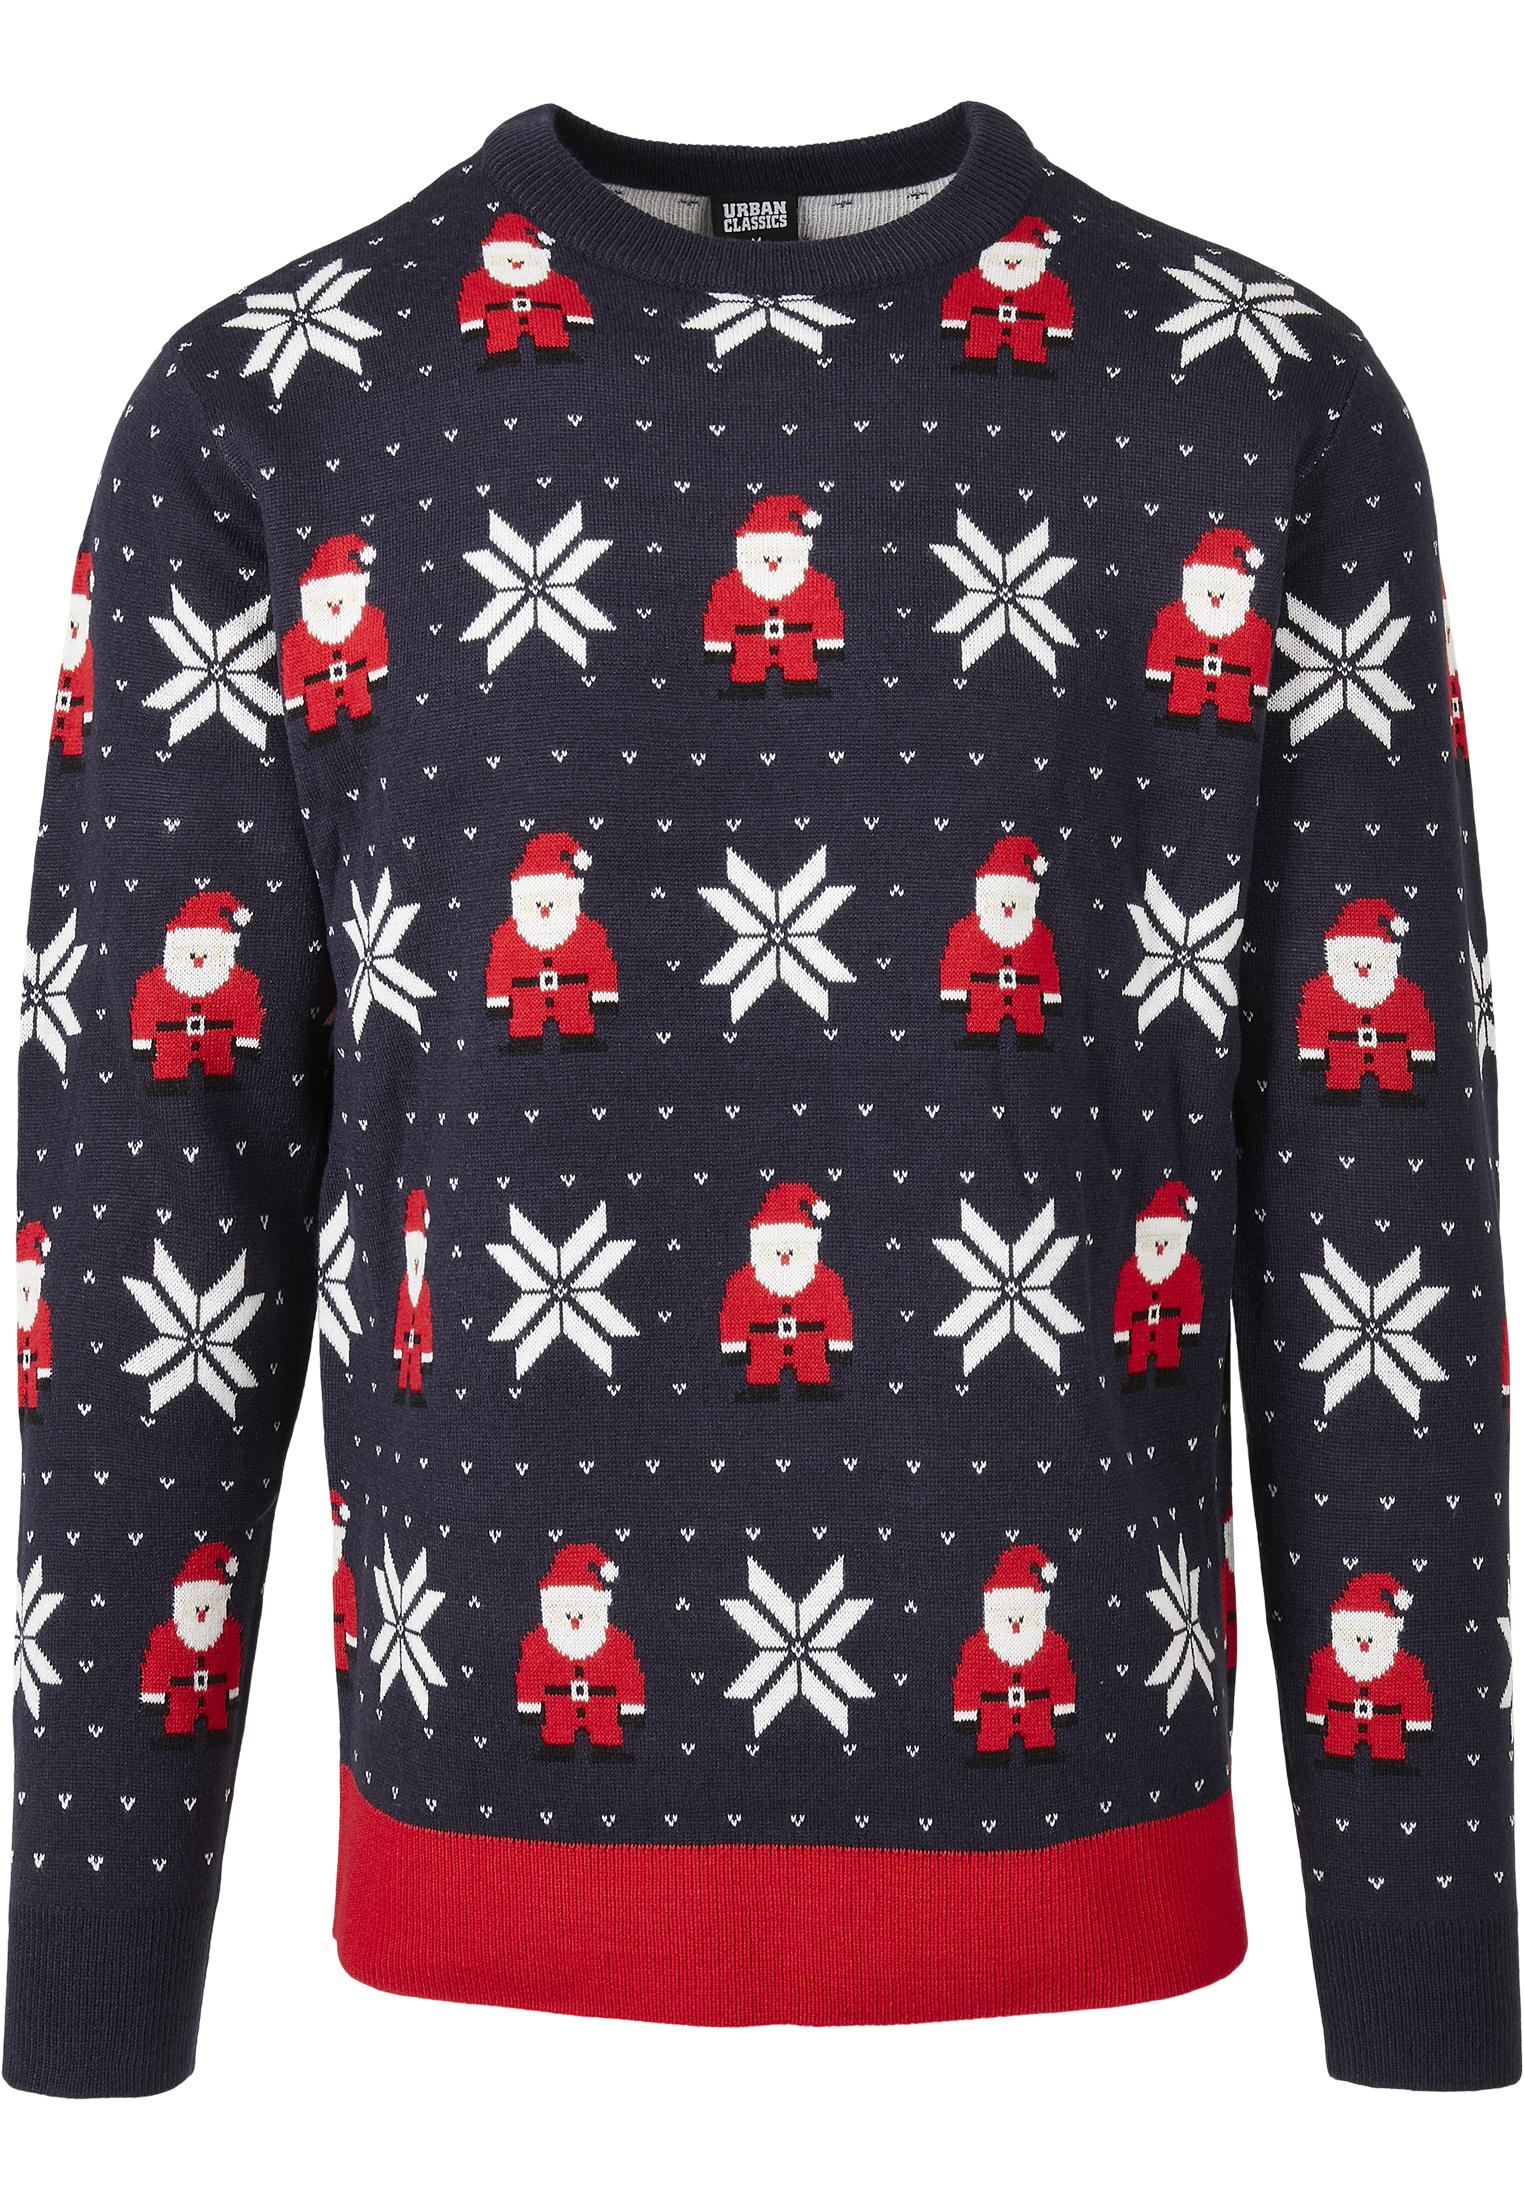 UC Men Nicolaus And Snowflakes Sweater (Farbe: nicolaus and snowflake aop / Größe: S)